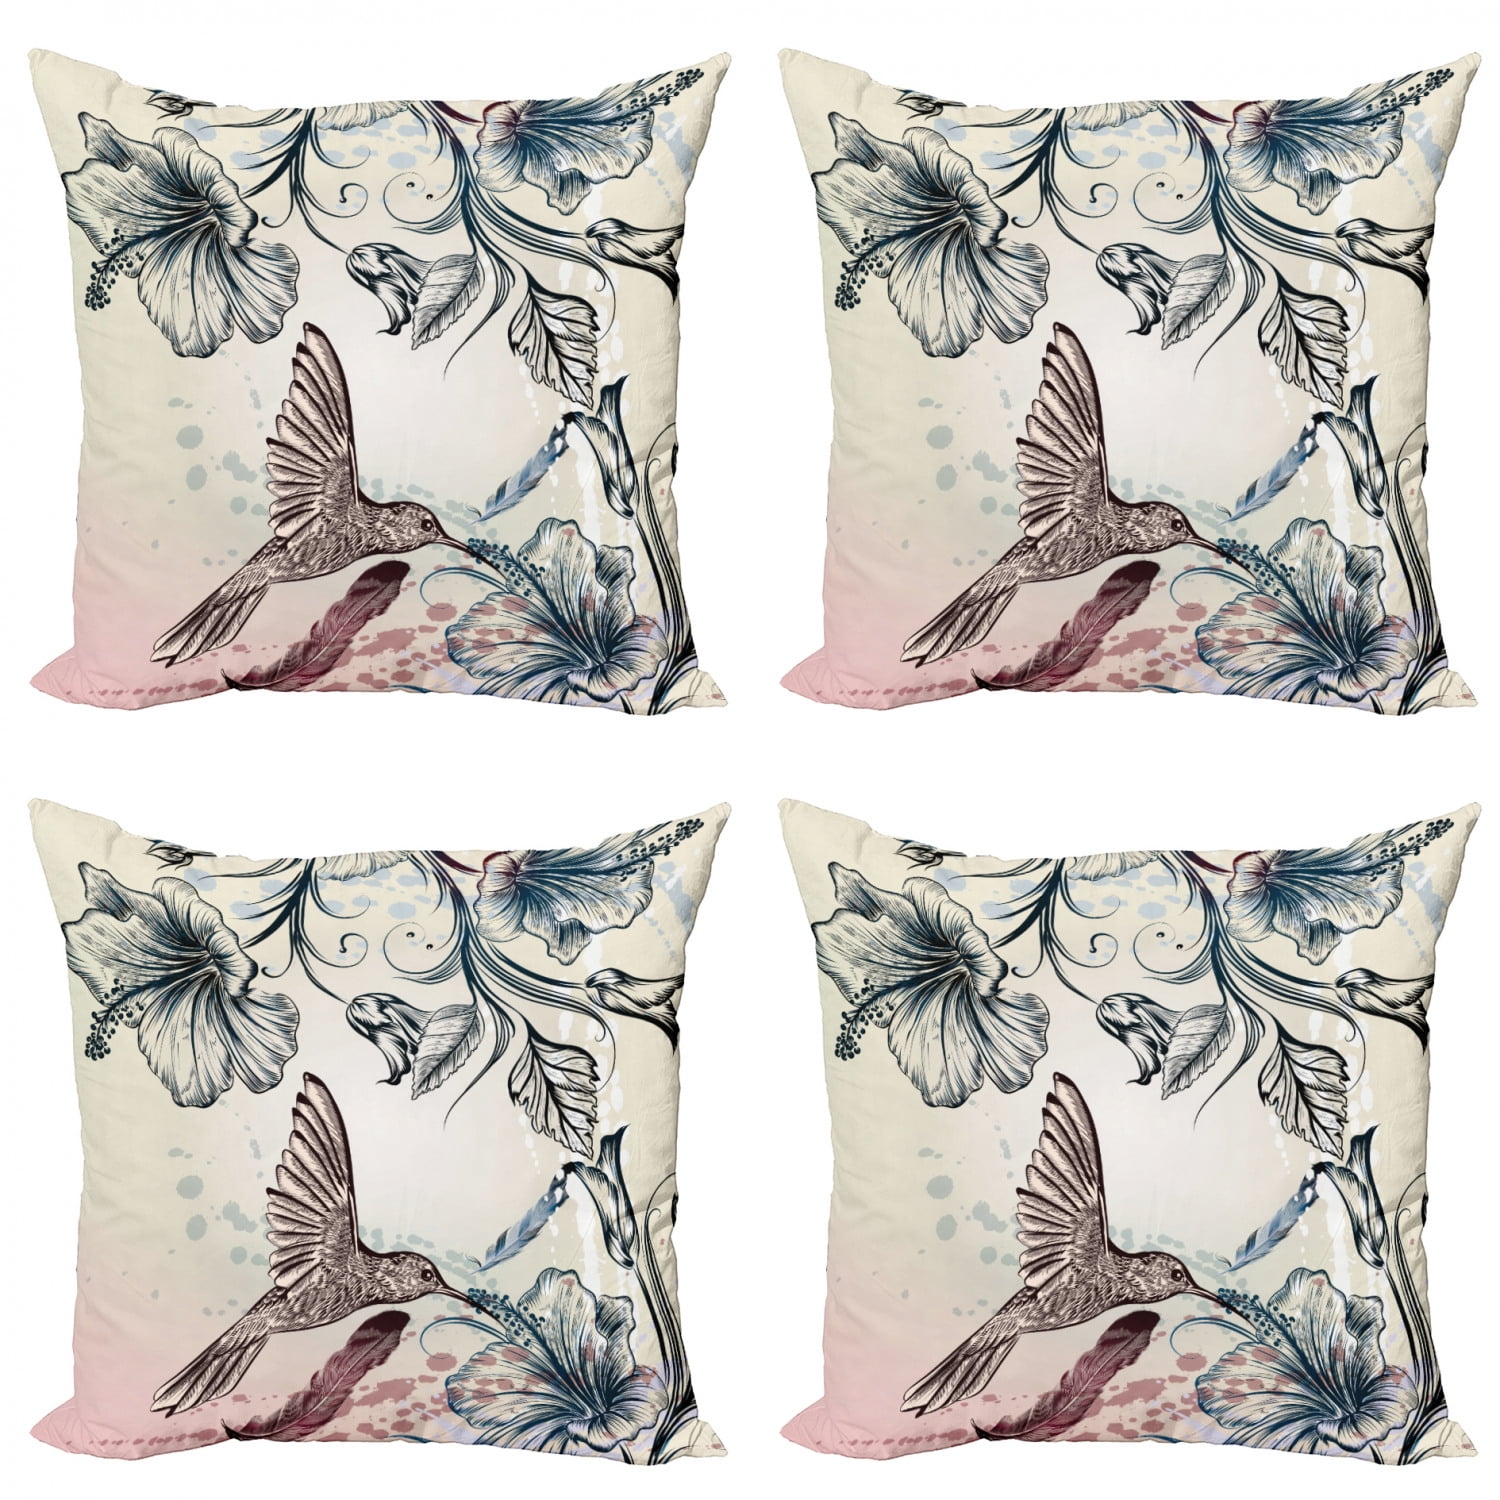 40cm Living Room Accessories Blue Hummingbird Cushion Covers Square Cushion Covers 36cm Light Blue Throw Pillows Bird Themed Cushion Cover Choice of Sizes 30cm 46cm Square Floral Room Decor 